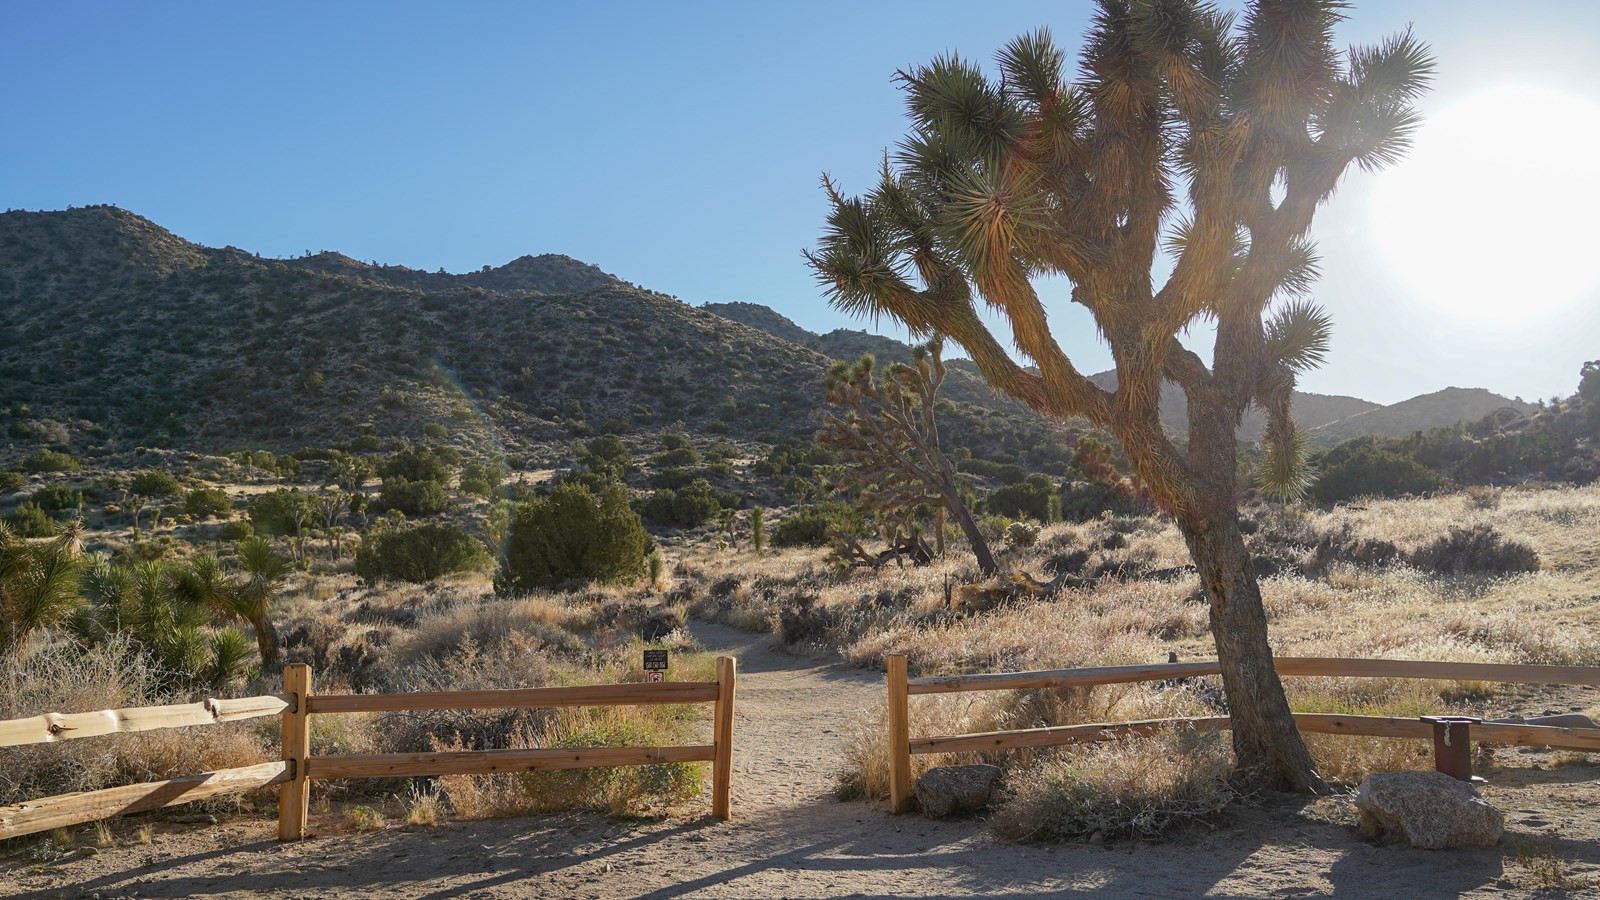 A large Joshua tree stands behind wooden fence near an opening where a hiking path leads through.